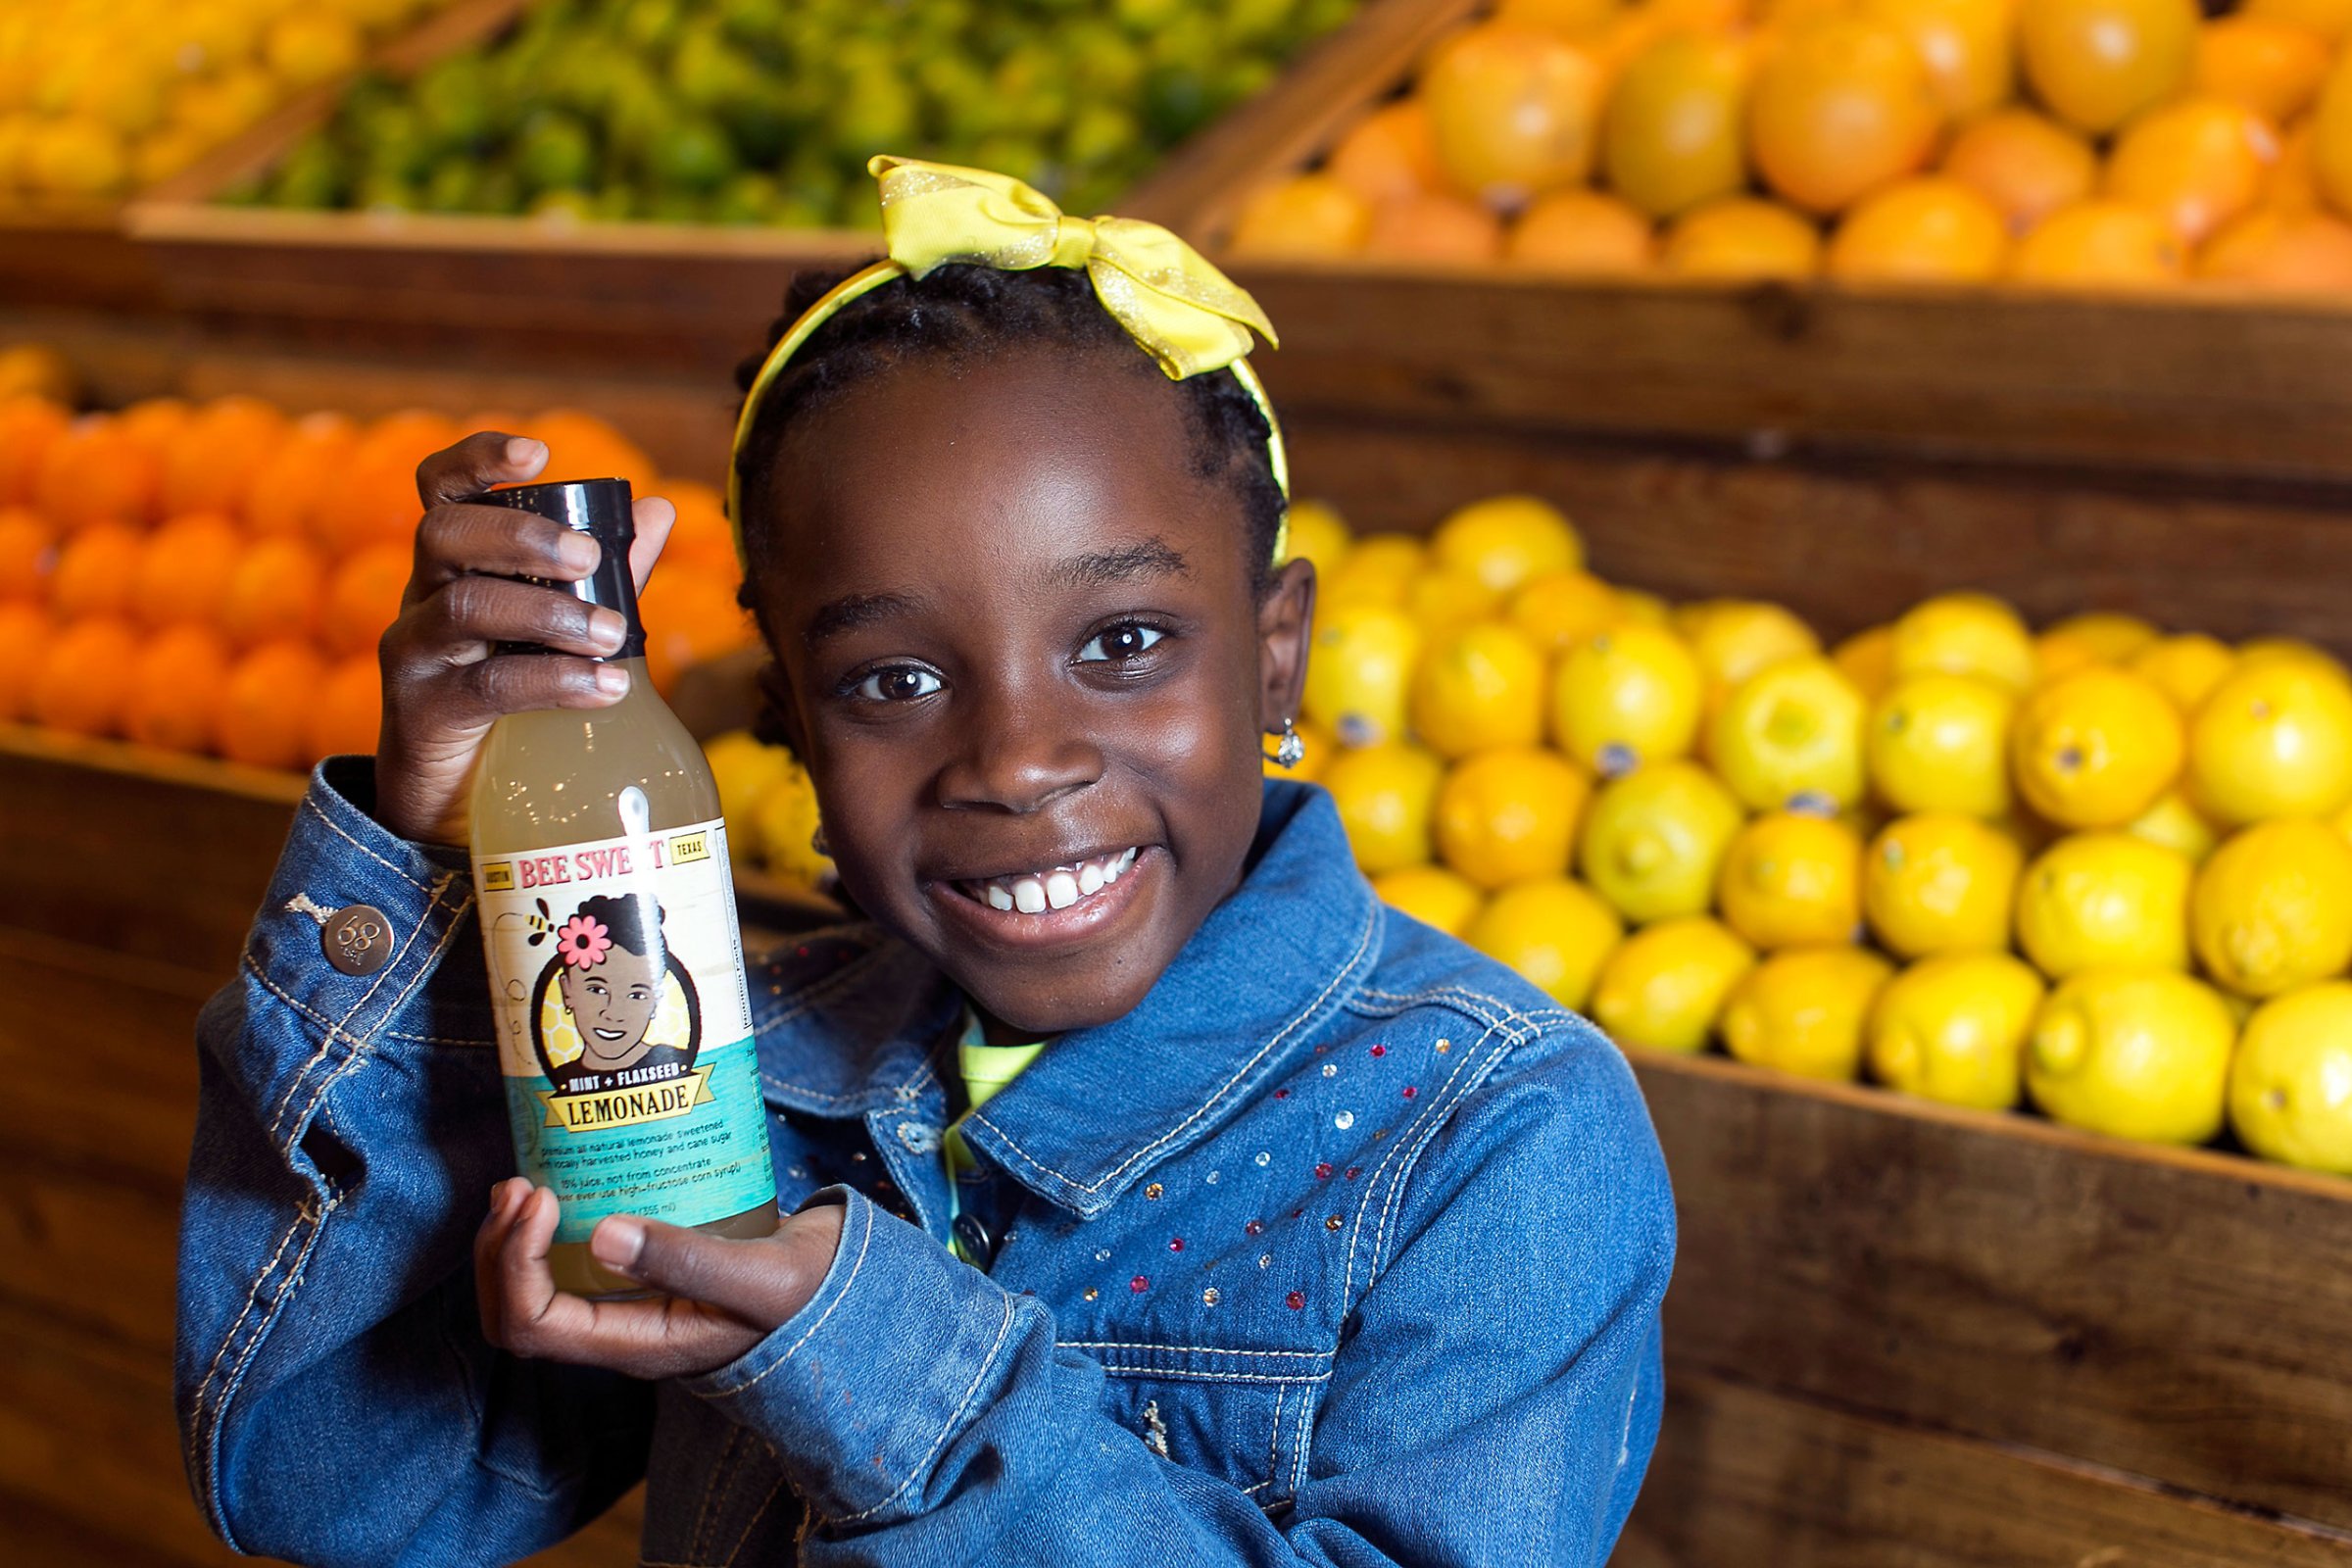 In this Jan. 27, 2014, photo, Mikaila Ulmer stands for a photo as she holds a bottle of Bee Sweet Lemonade that she and her family make and sell at Whole Foods at the Domain in Austin, Texas.